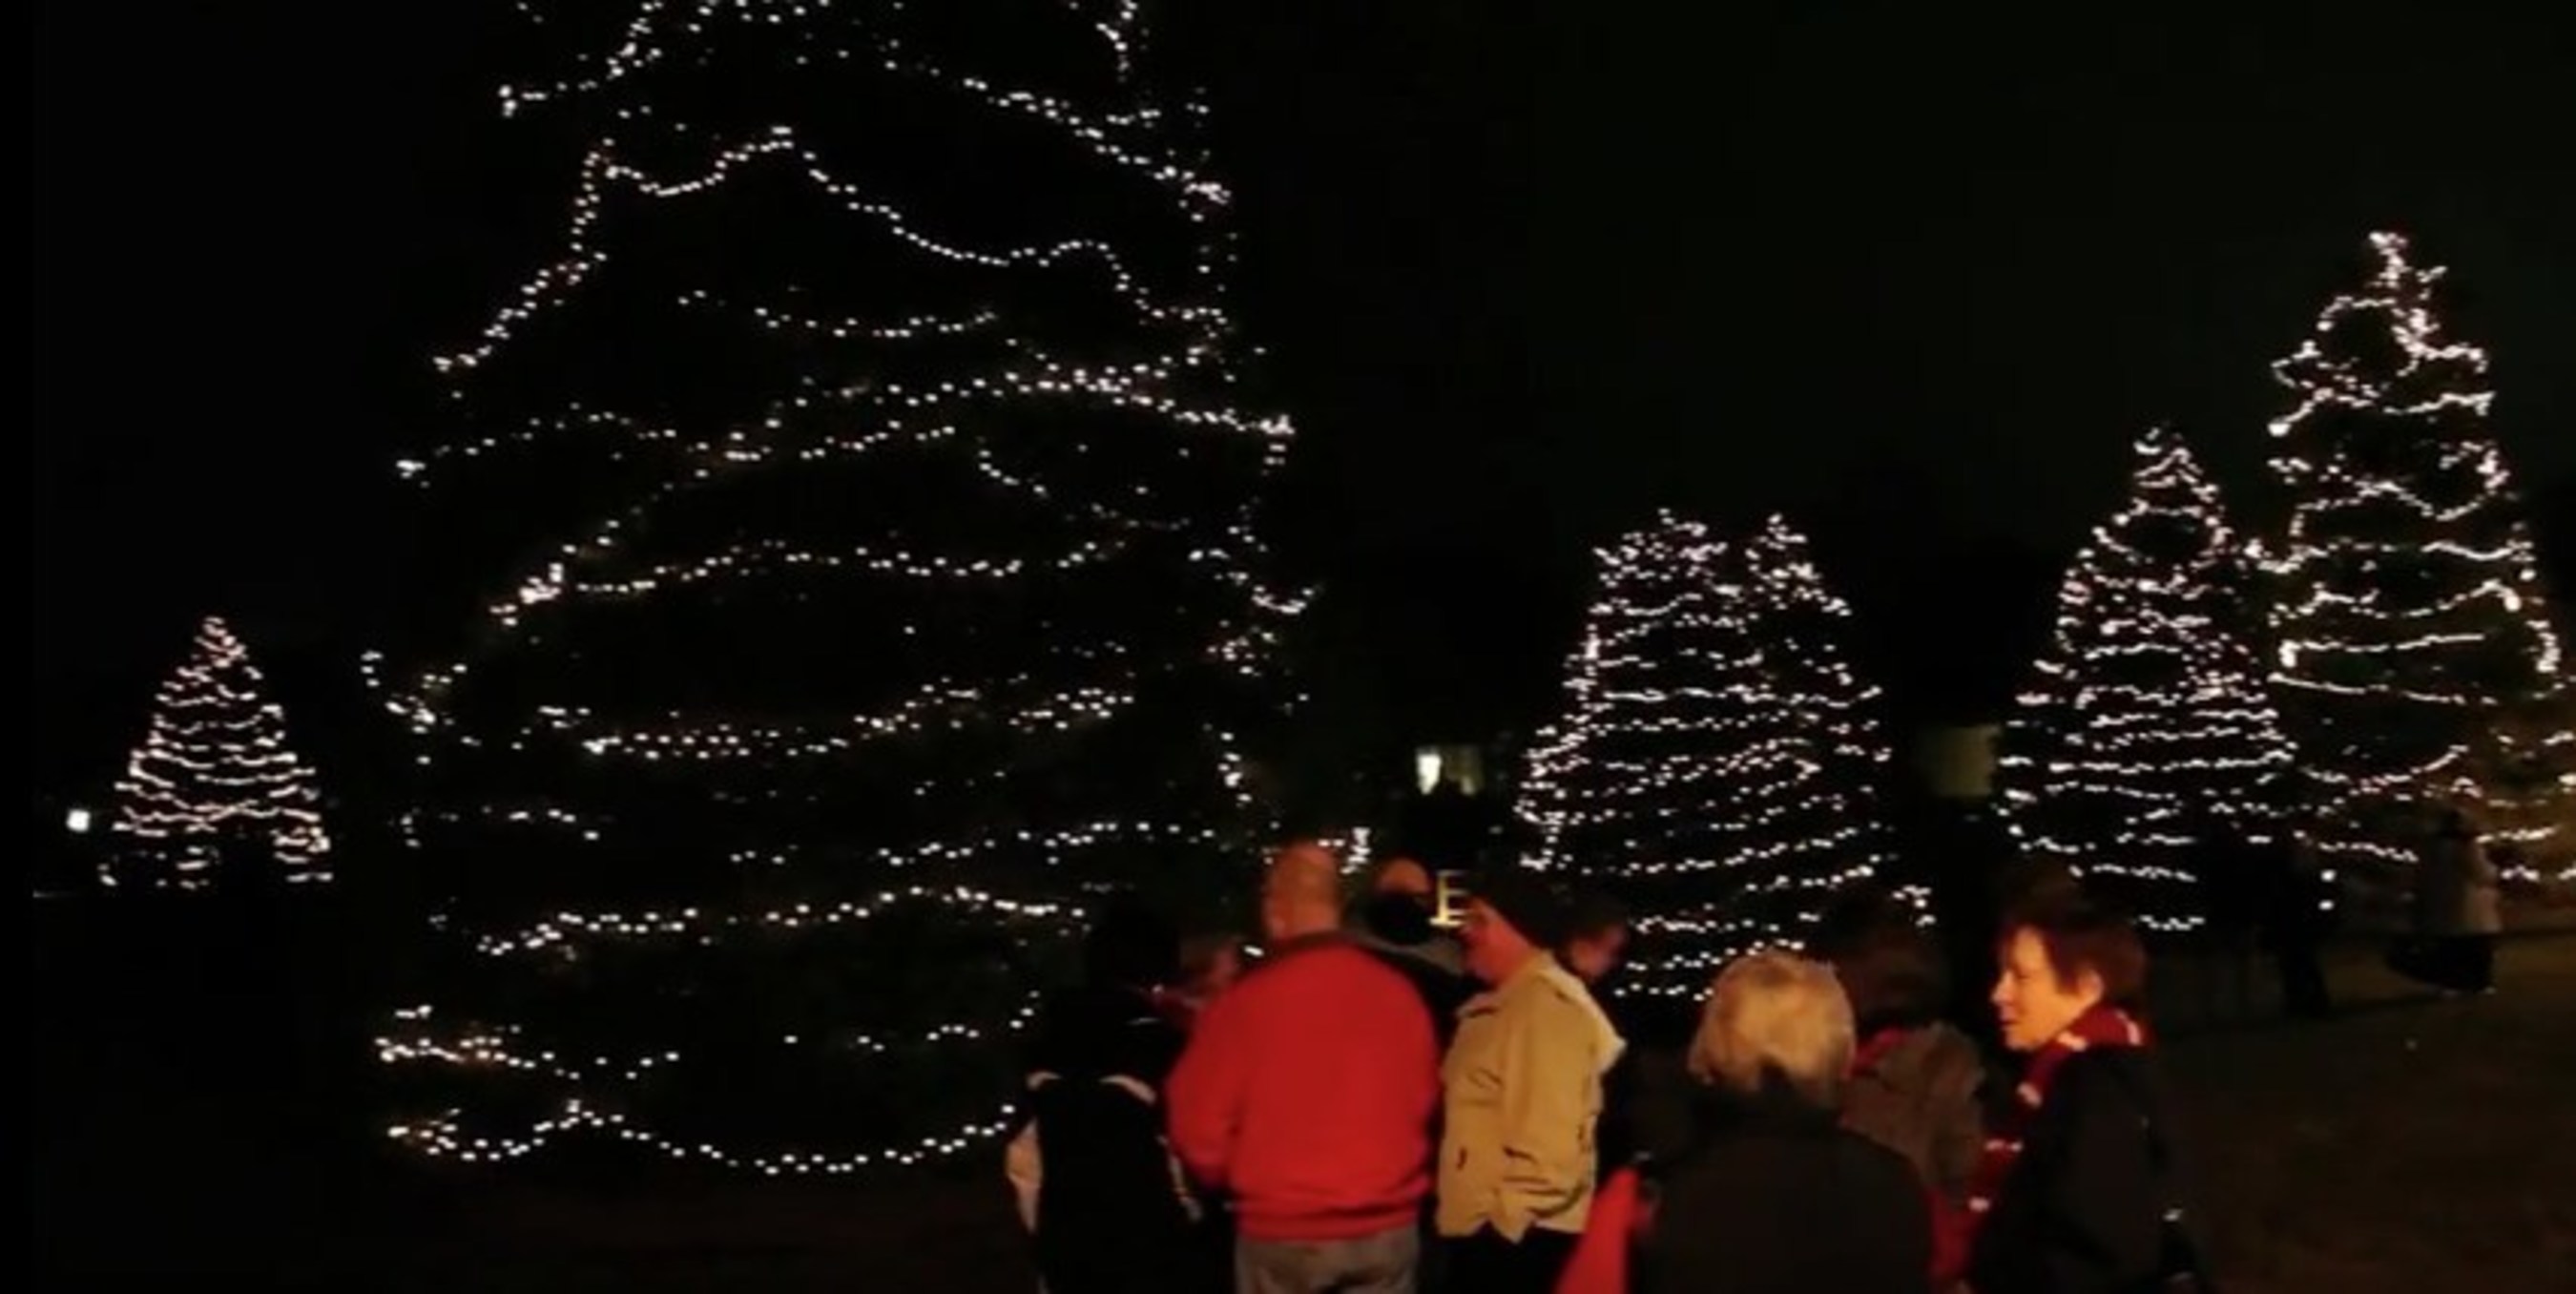 Hospice programs across the country host events for the community like this annual Festival of Lights at Hospice & Community Care in Lancaster, Pennsylvania.